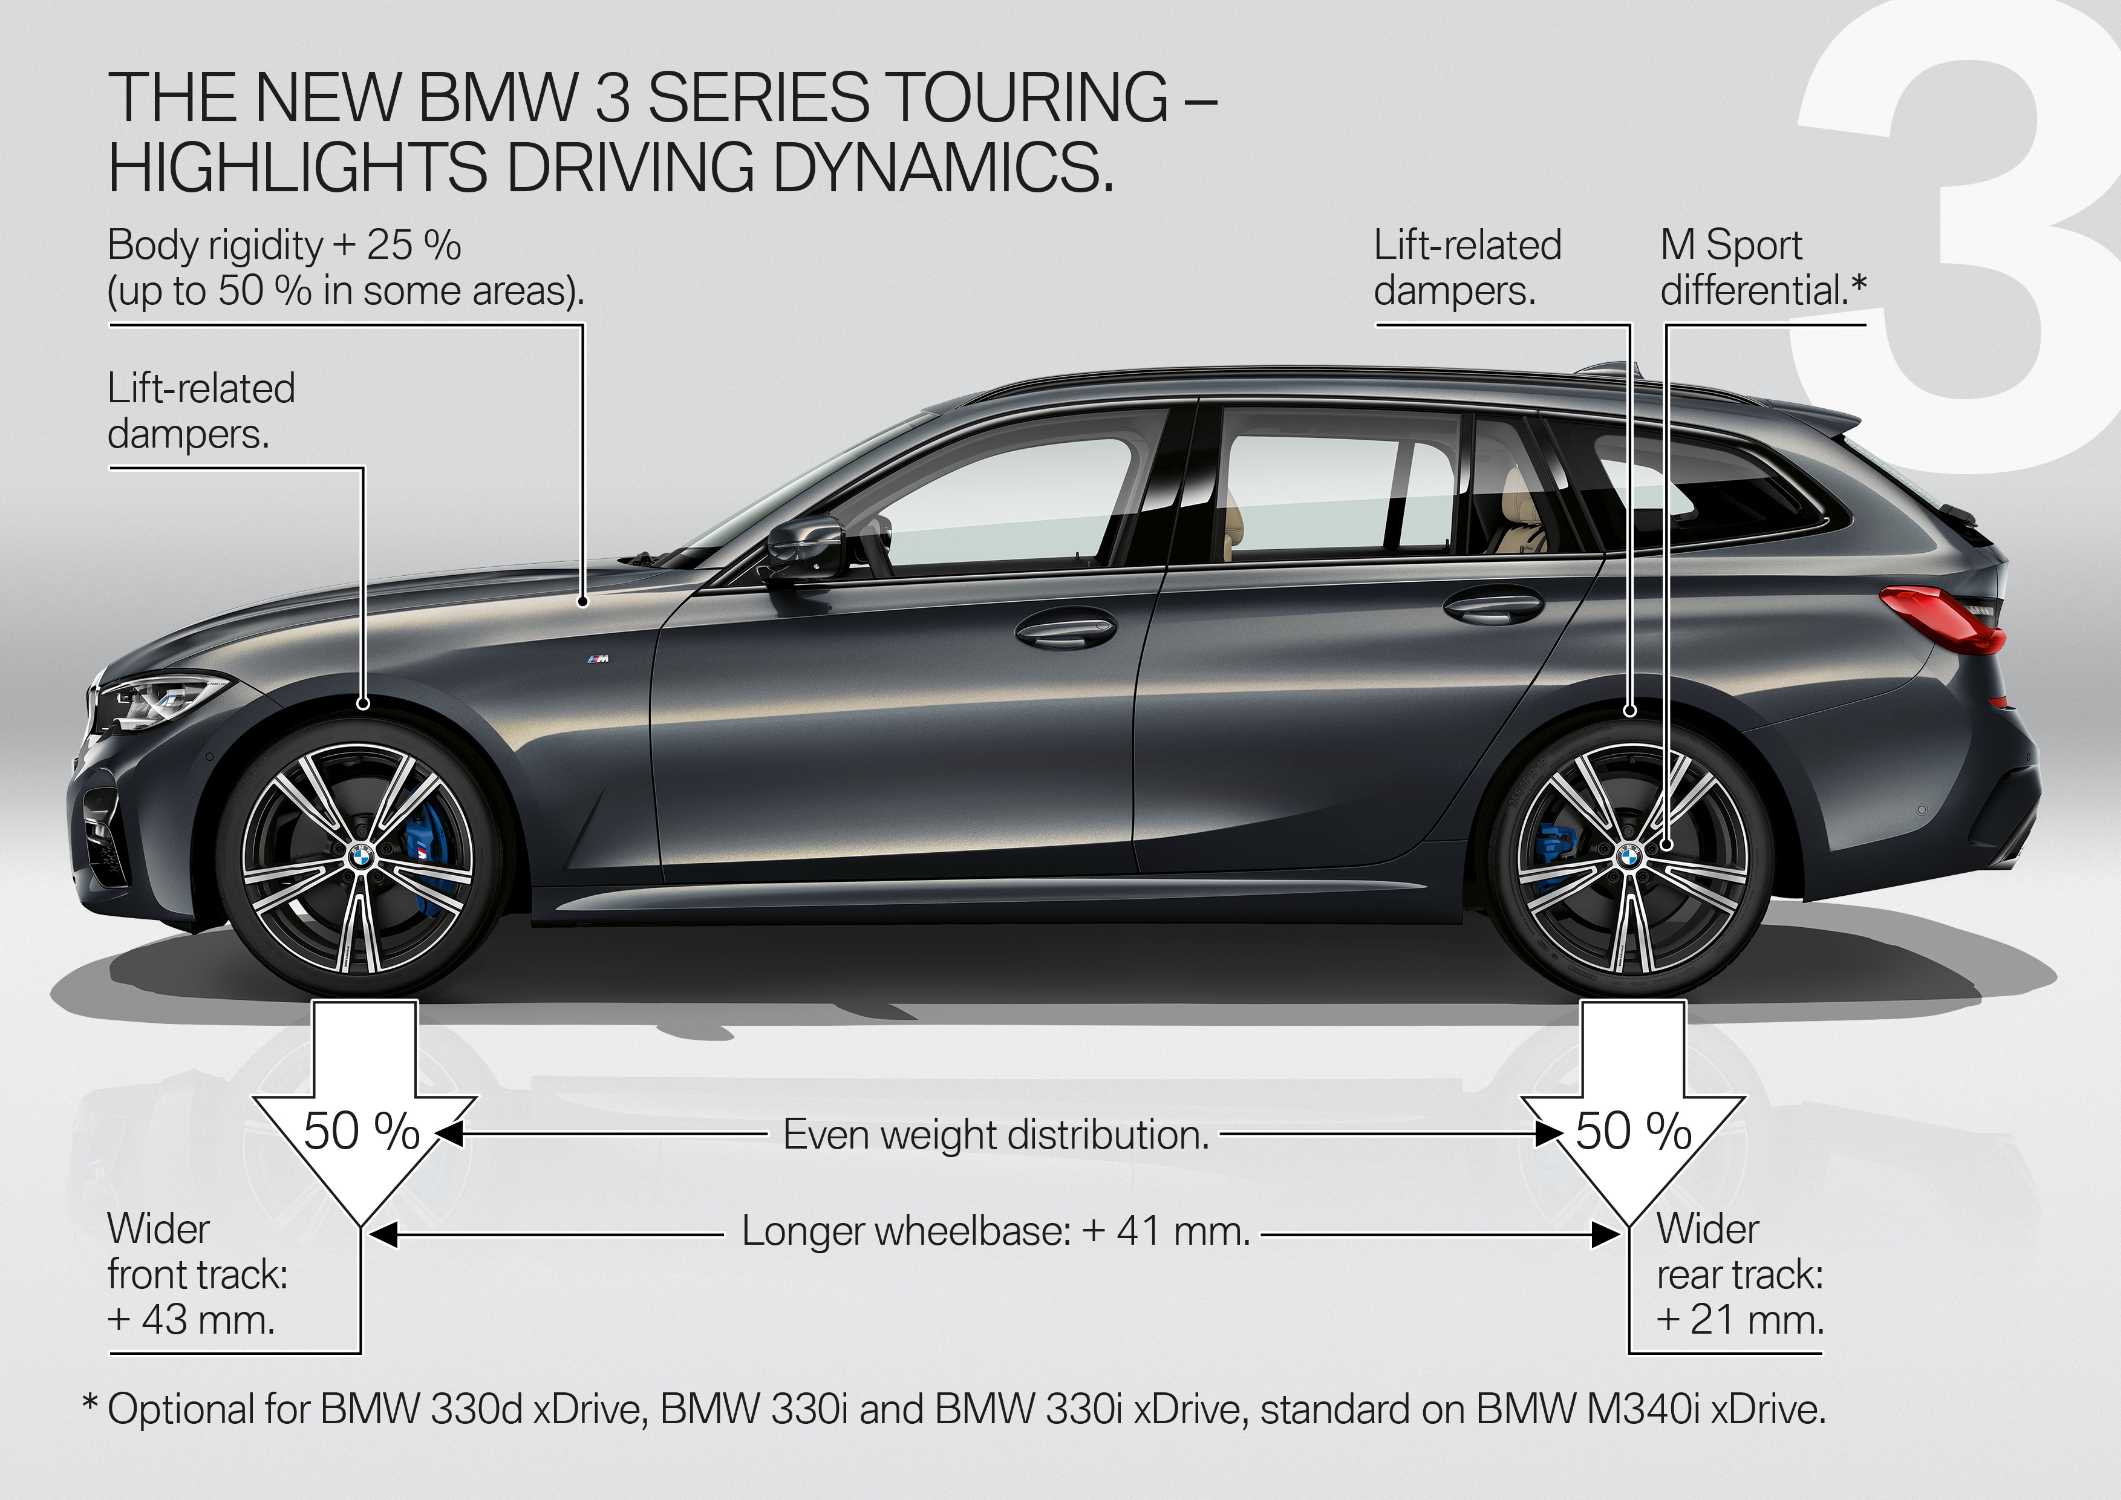 The new BMW 3 Series Touring – Product hightlights (06/2019).